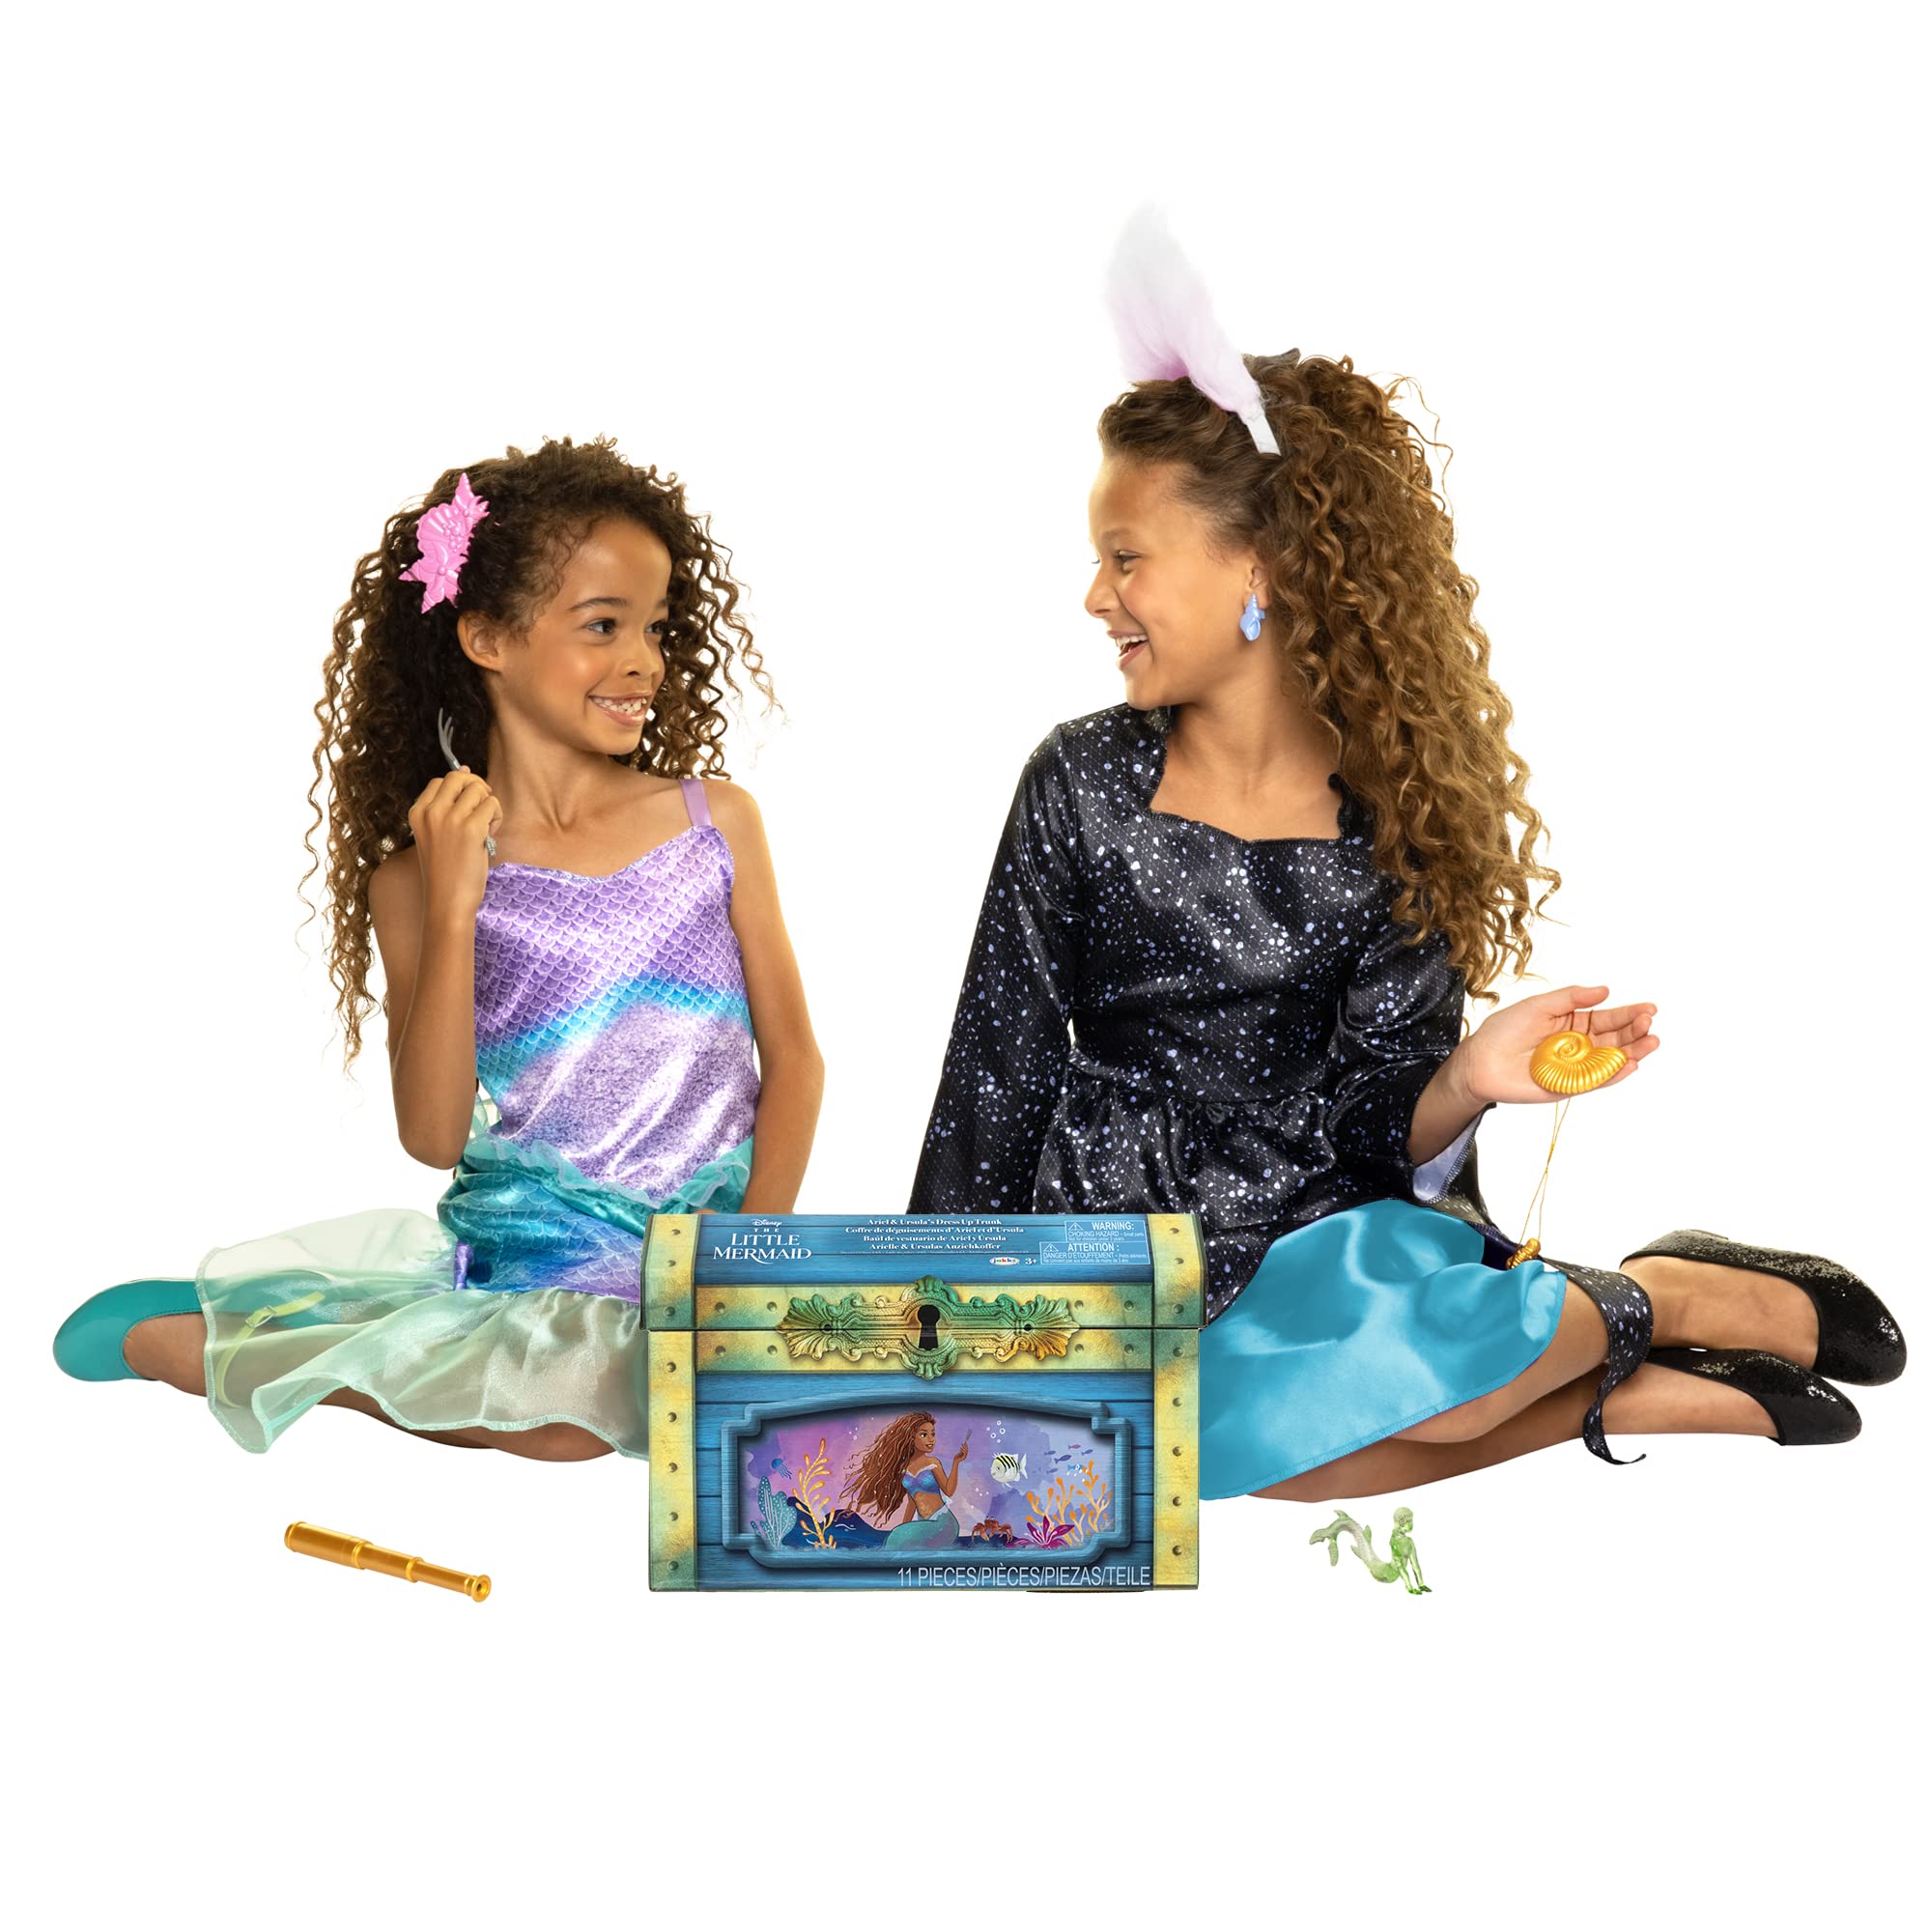 Disney The Little Mermaid Ariel & Ursula Dress Up Trunk, Treasure Chest Includes Ariel and Ursula's Outfit Dresses with Accessories [Amazon Exclusive]